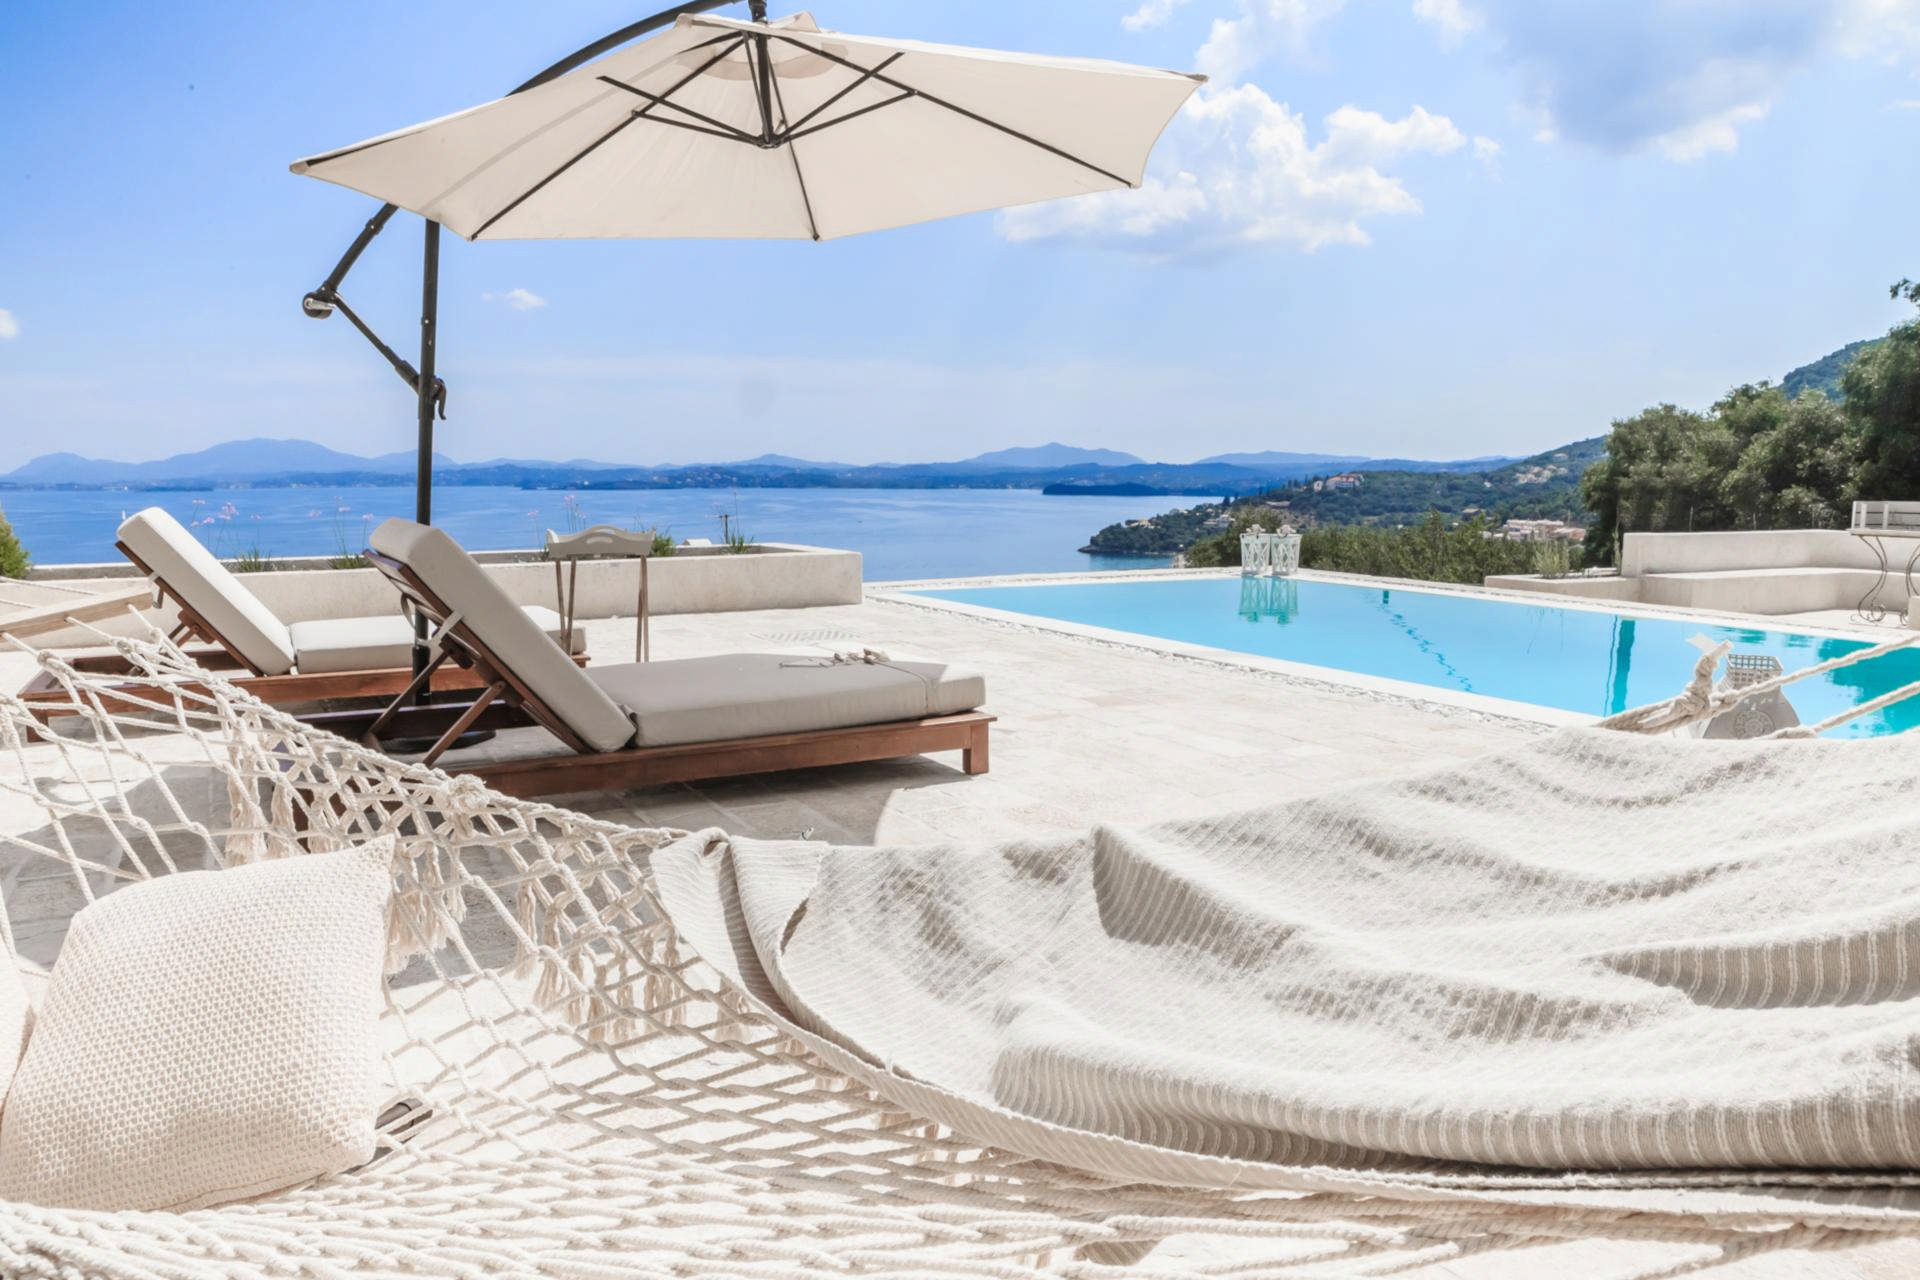 Feast your eyes on panoramic views in Corfu’s fabulous Dysi